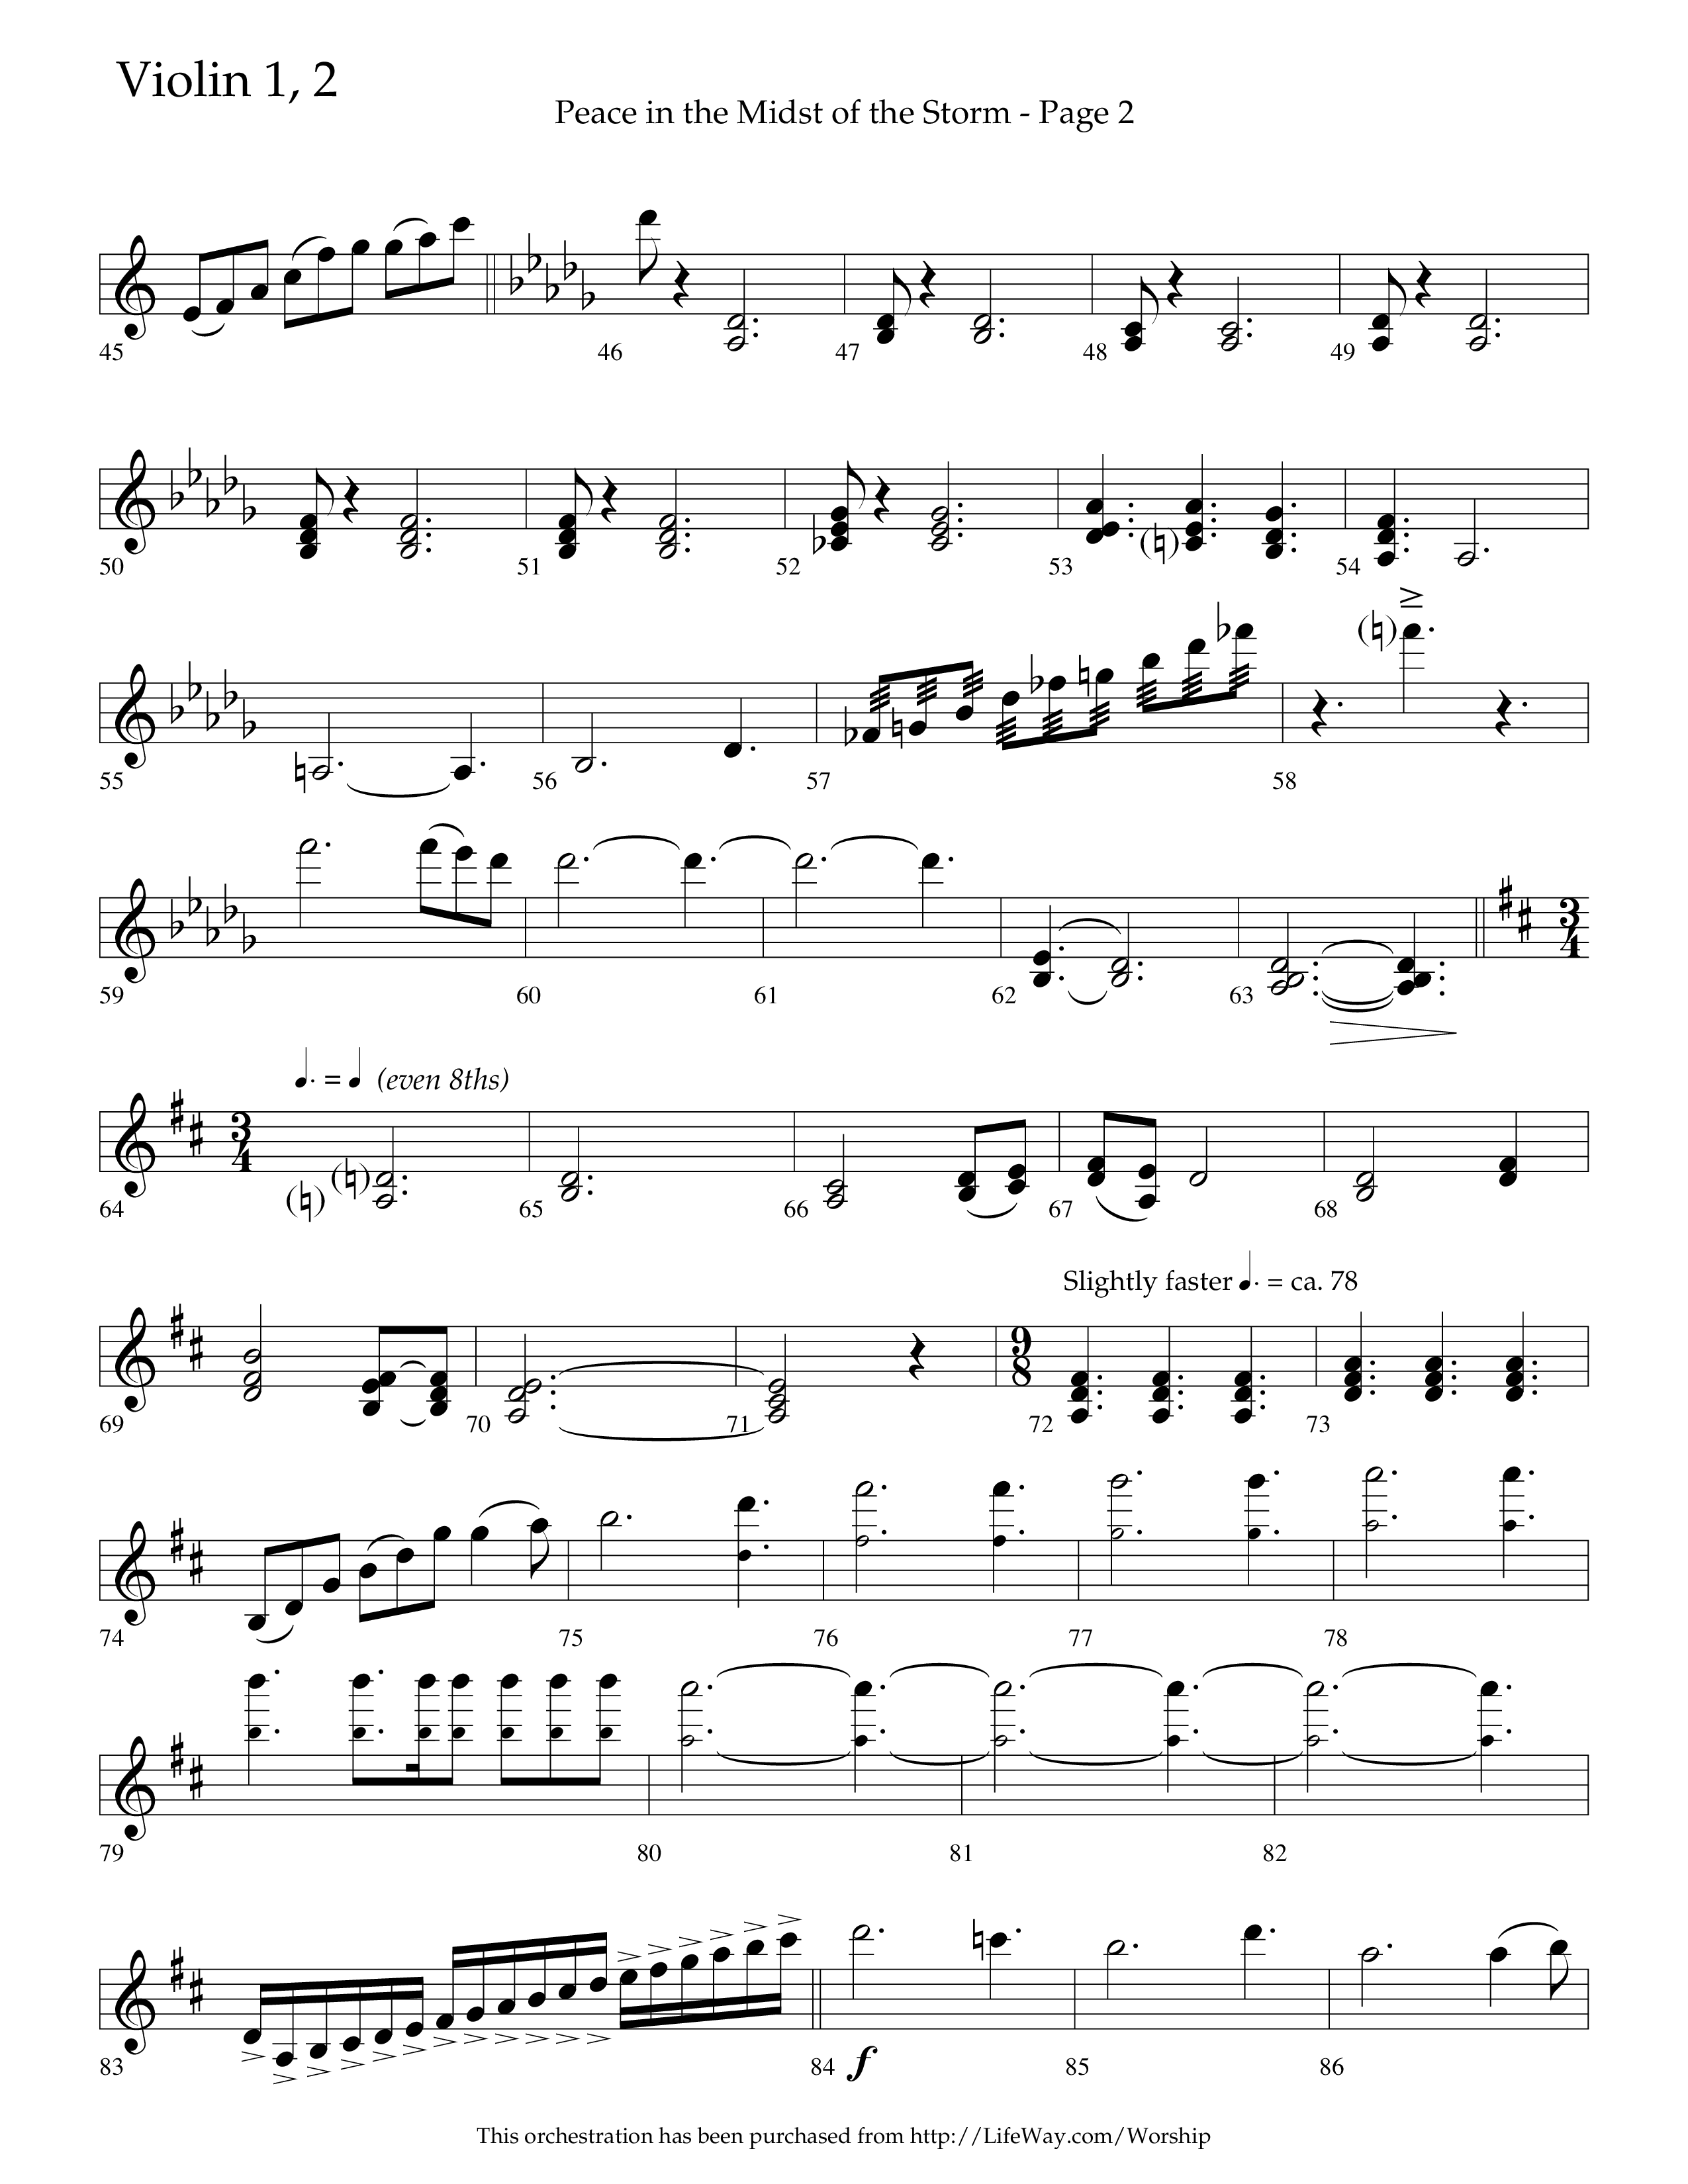 Peace In The Midst Of The Storm (Choral Anthem SATB) Violin 1/2 (Lifeway Choral / Arr. David T. Clydesdale)